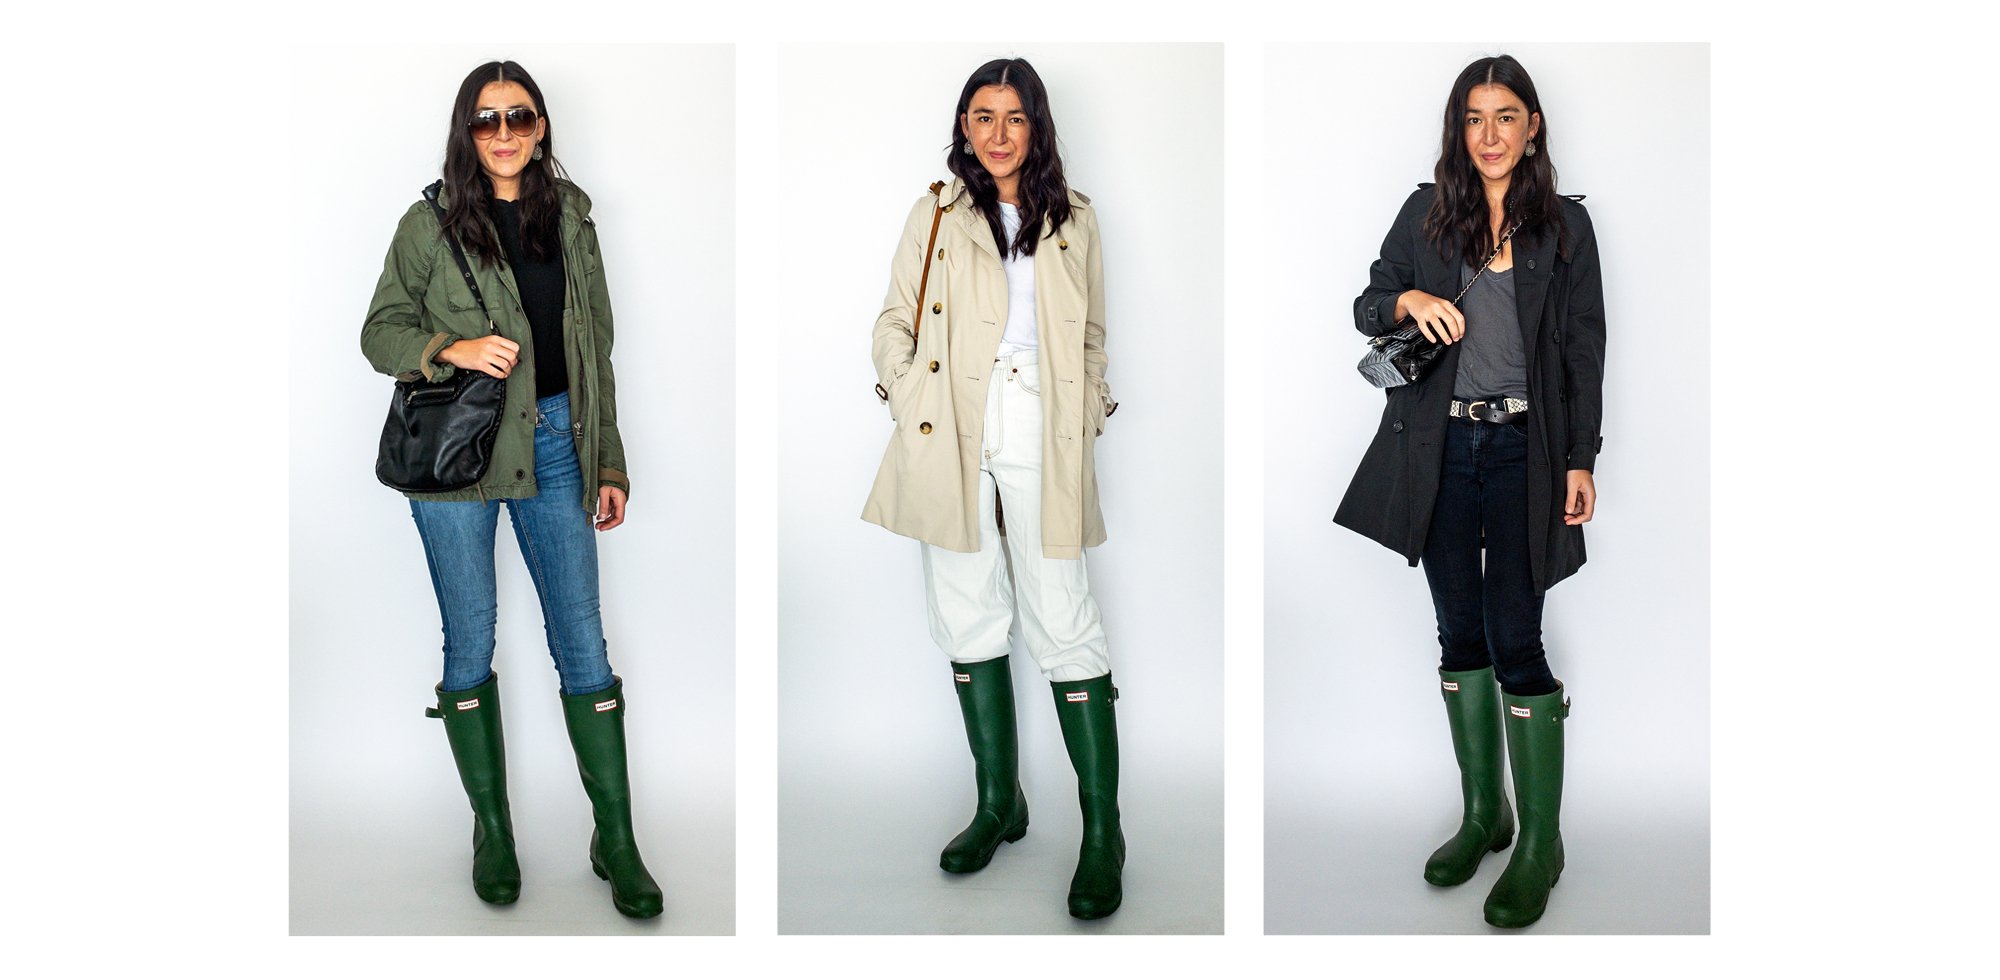 How to wear hunter boots with jeans